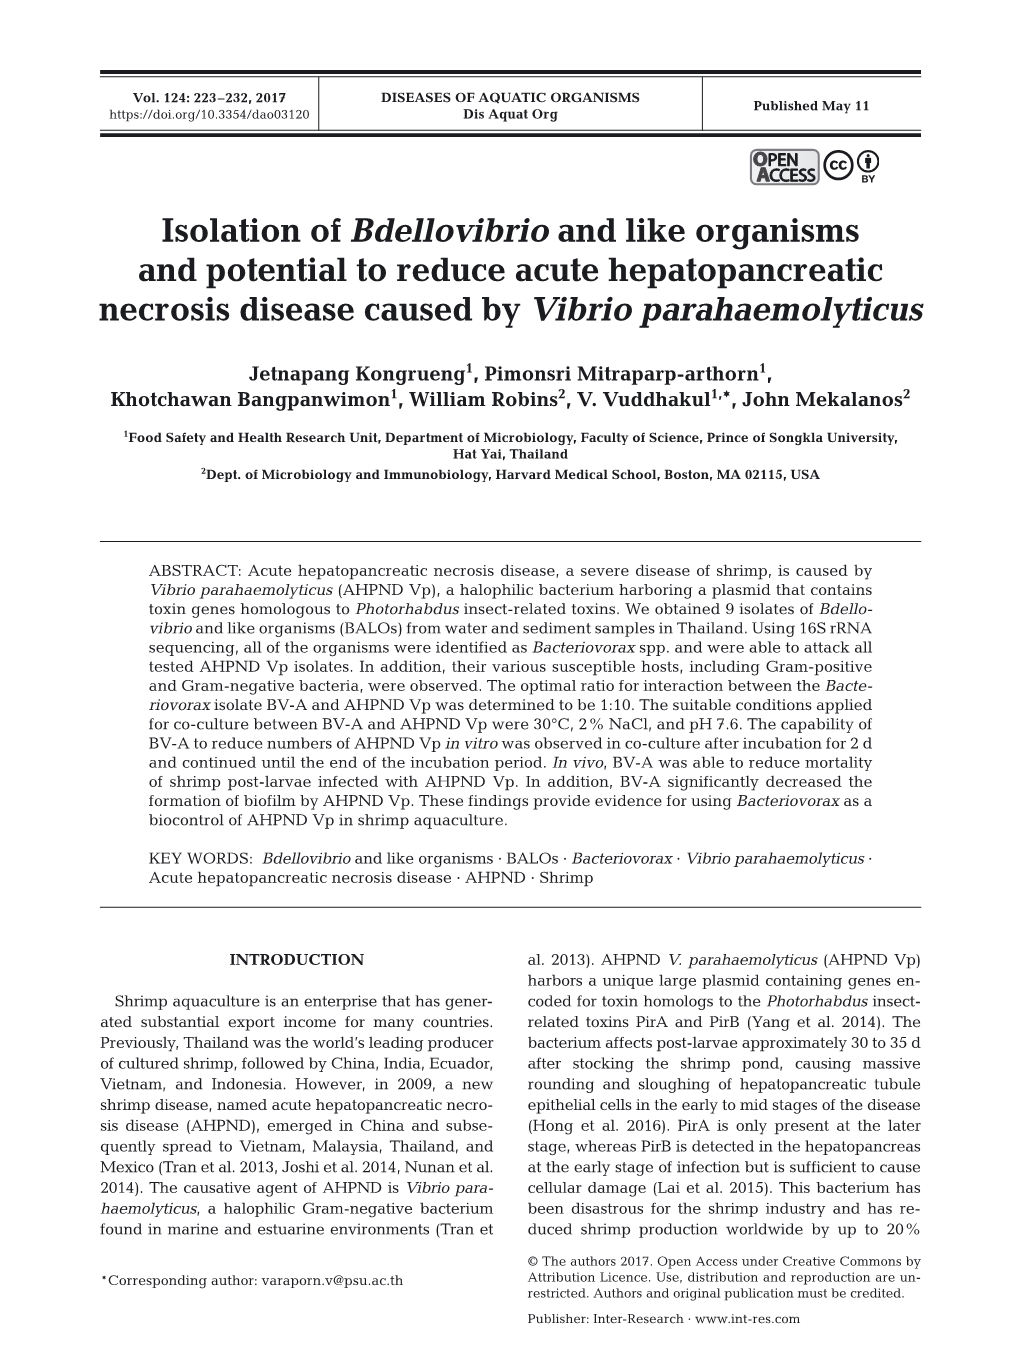 Isolation of Bdellovibrio and Like Organisms and Potential to Reduce Acute Hepatopancreatic Necrosis Disease Caused by Vibrio Parahaemolyticus